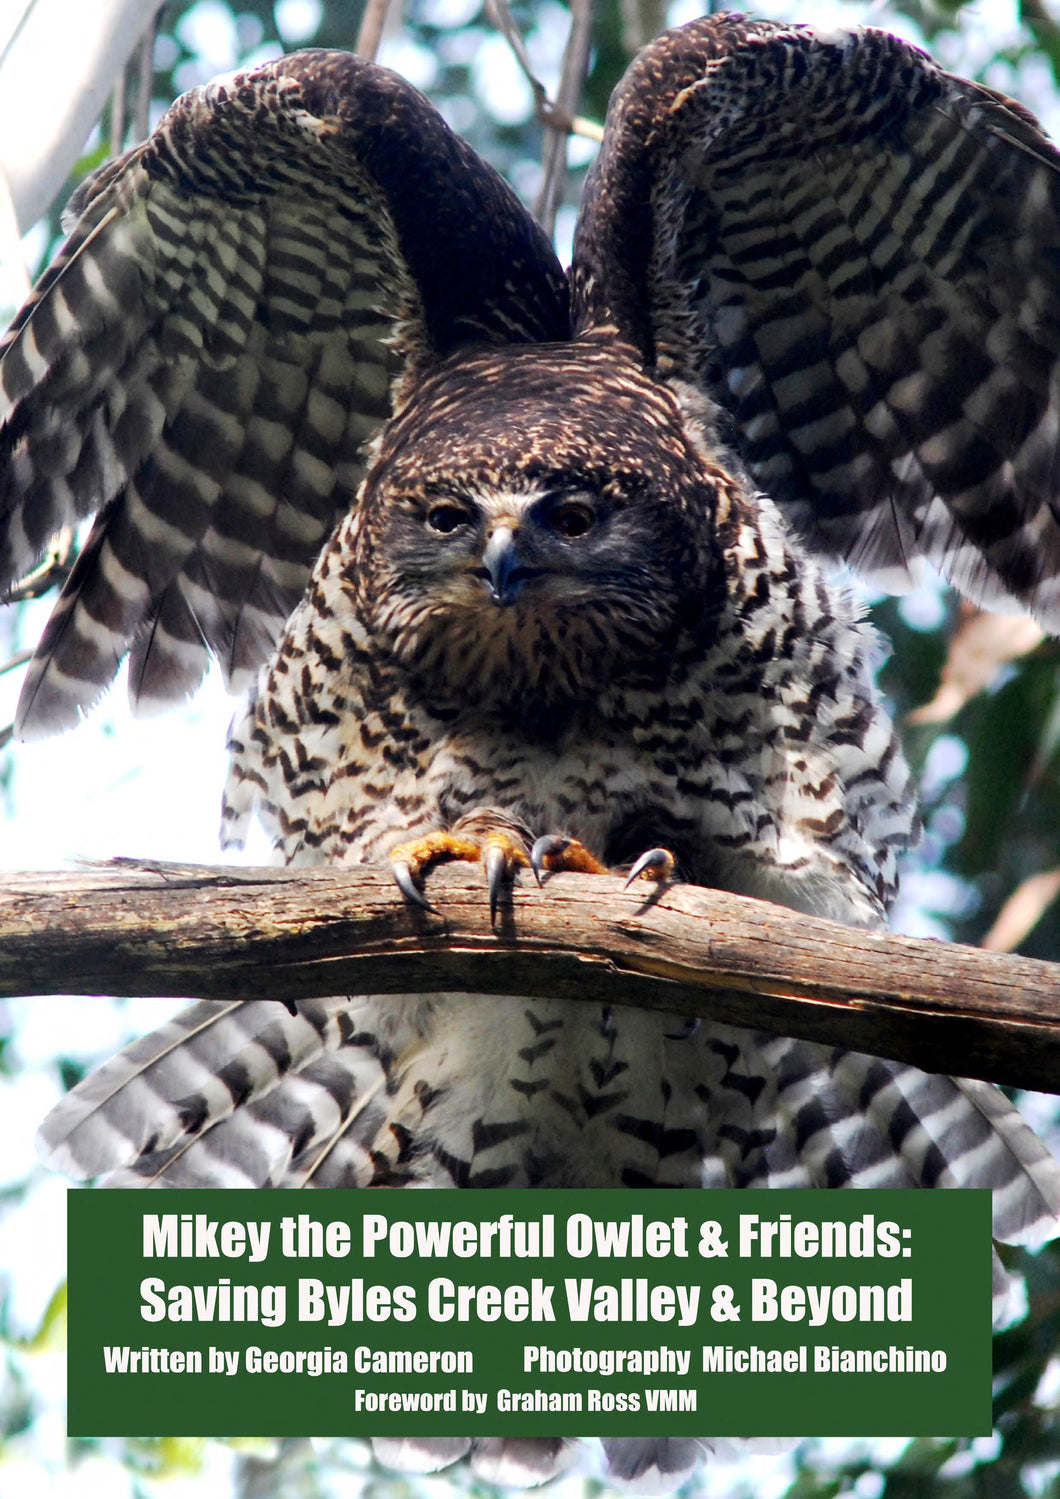 NEW POSTER - Solomon the Powerful Owl - Poster (price includes domestic postage & handling)